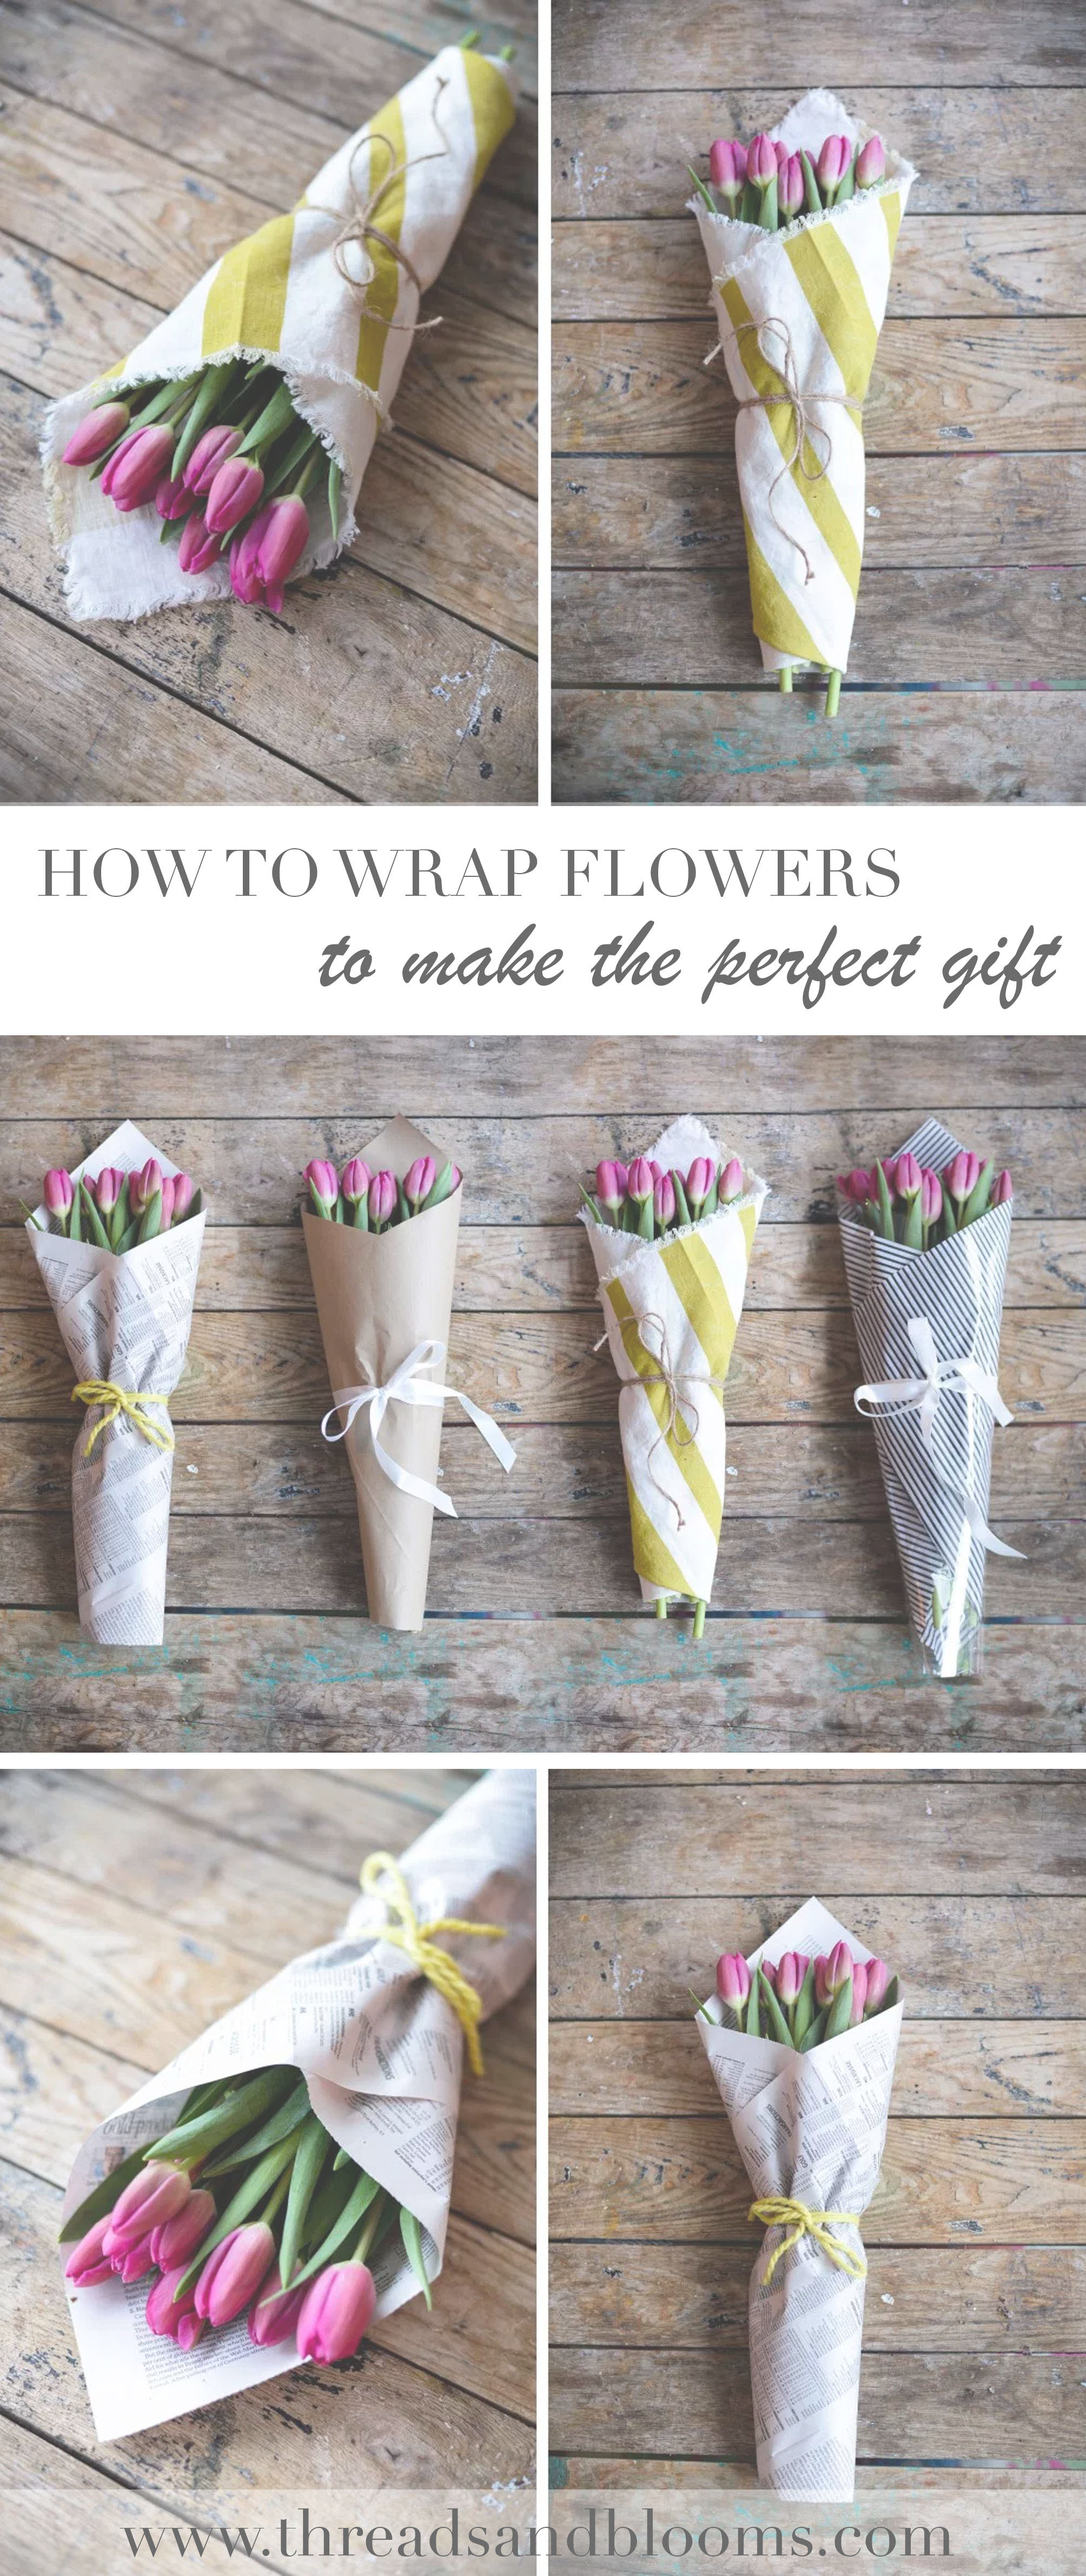 The flower wrapping sheet is made from kraft paper. We offer